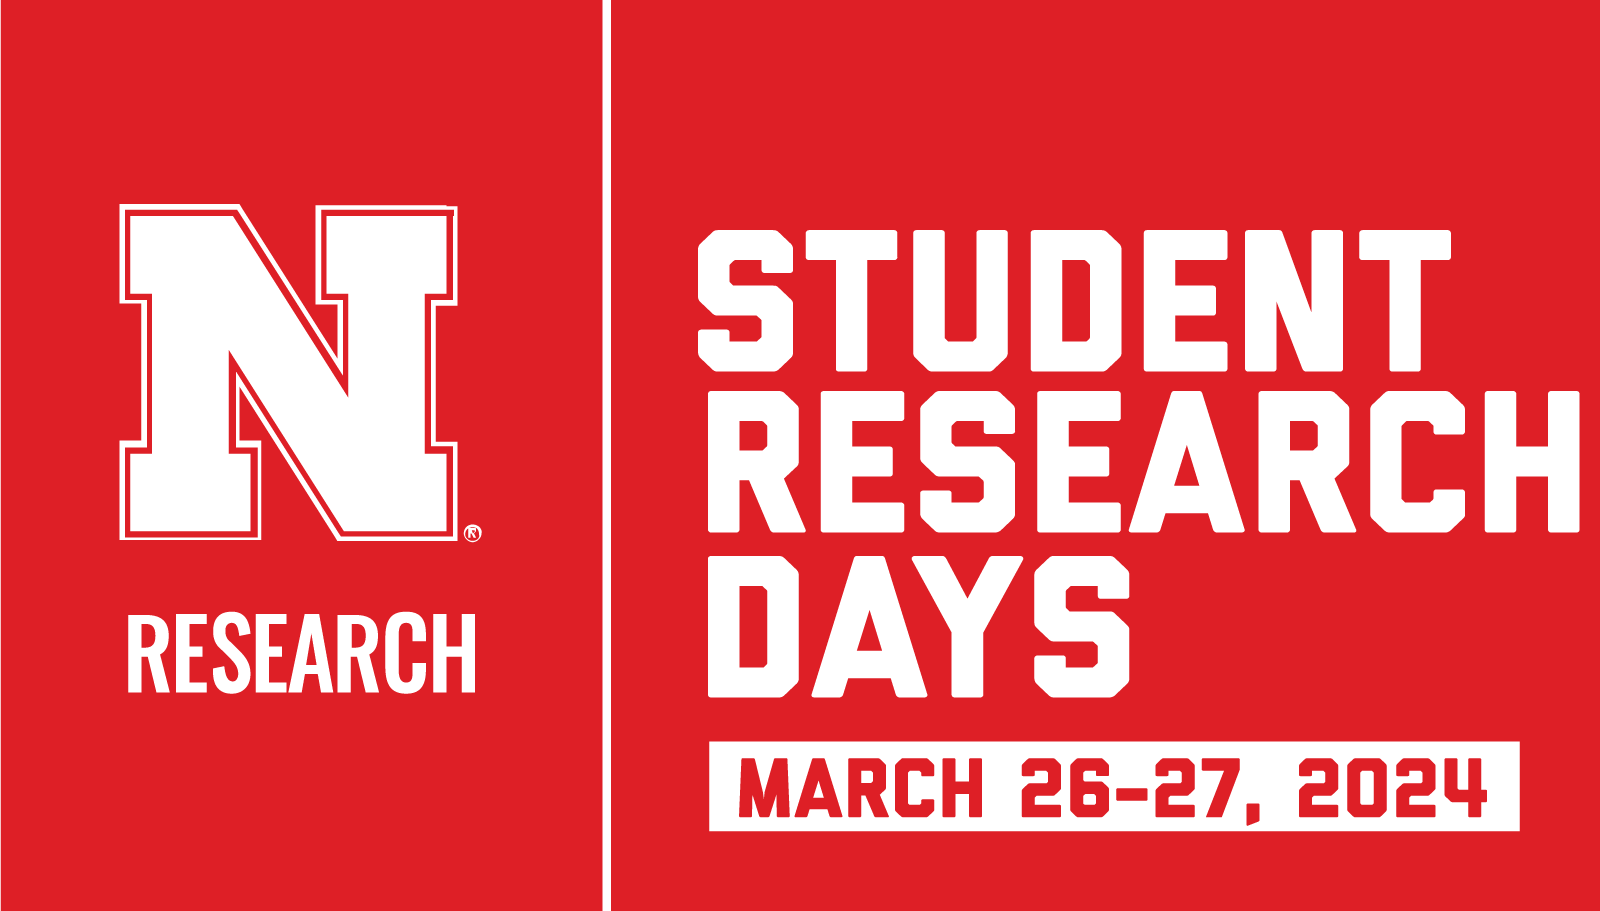 Come Attend Student Research Days!